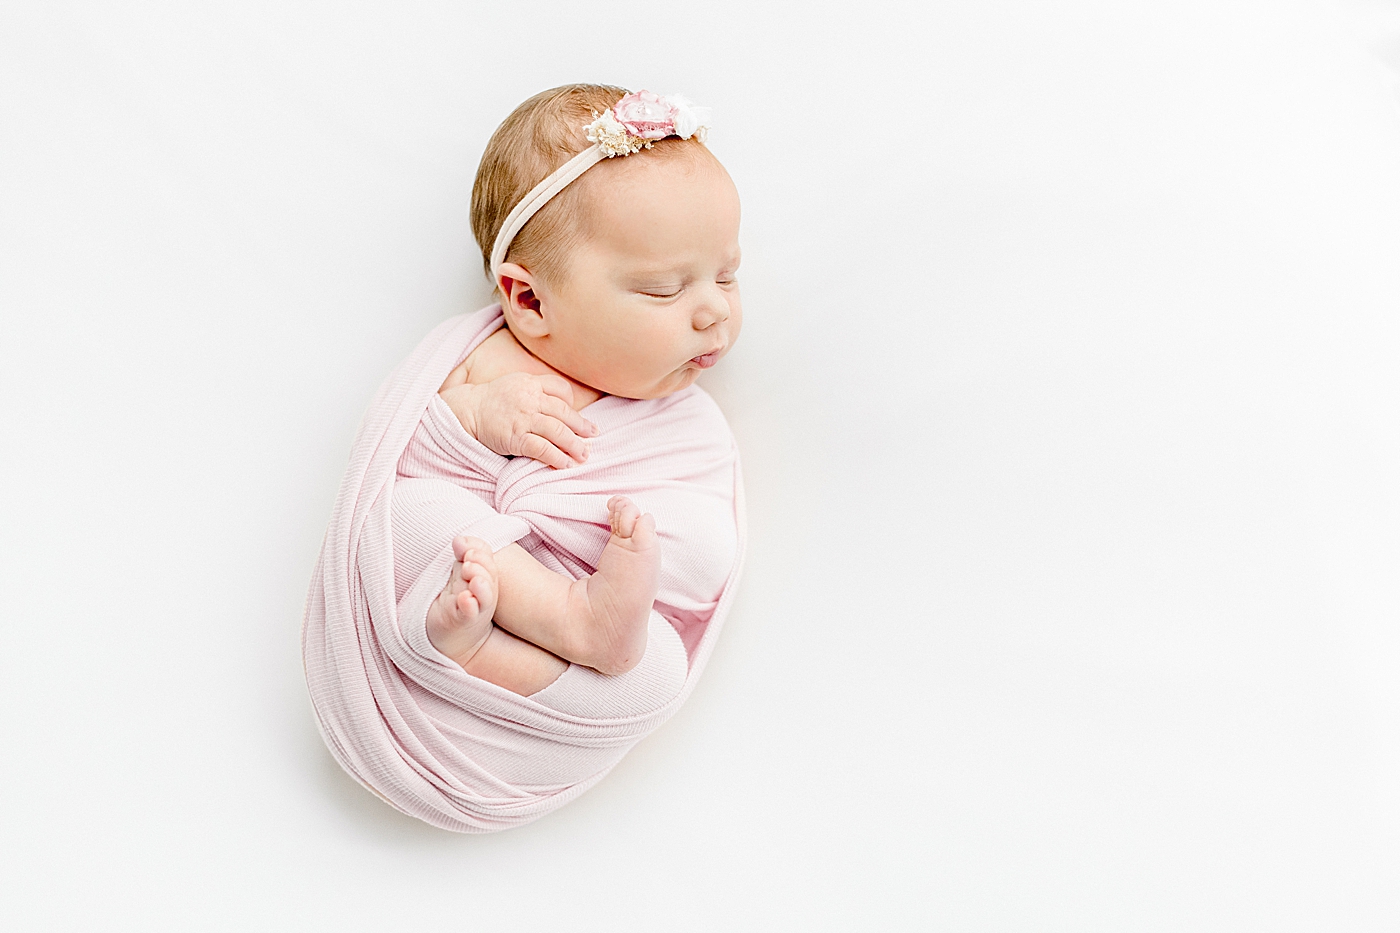 Baby girl wrapped in a pink swaddle sleeping | Image by Sana Ahmed Photography